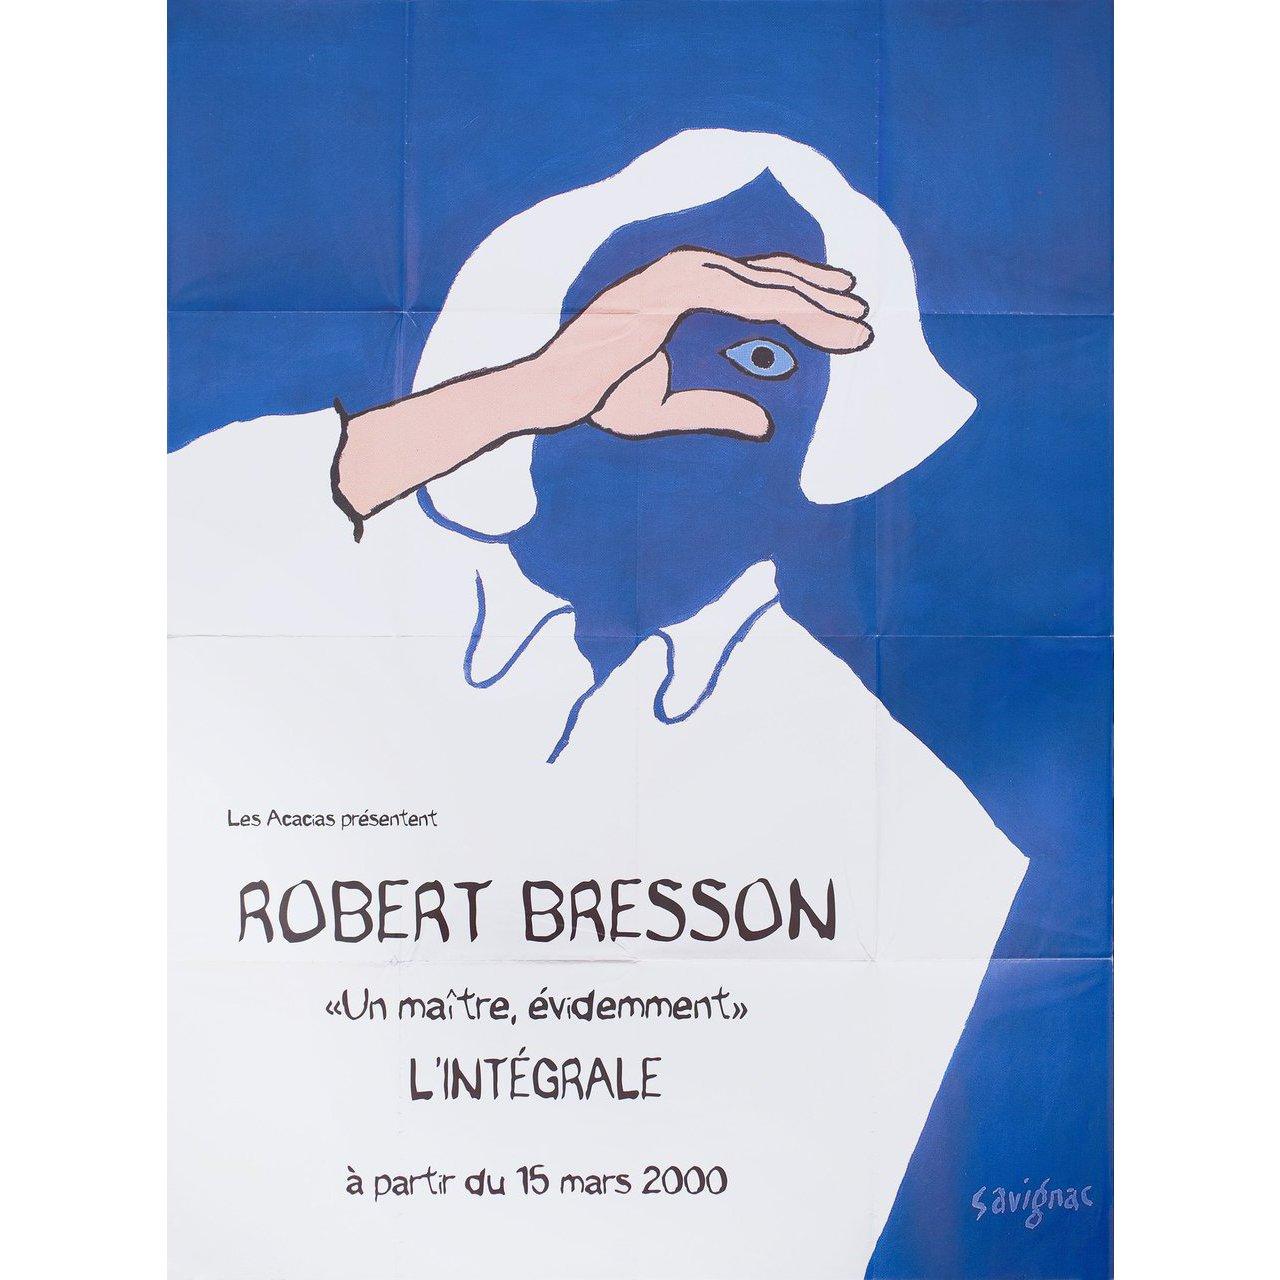 Original 2000 French grande poster by Raymond Savignac for the festival Robert Bresson L'Integrale with films directed by Robert Bresson. Very Good-Fine condition, folded. Many original posters were issued folded or were subsequently folded. Please